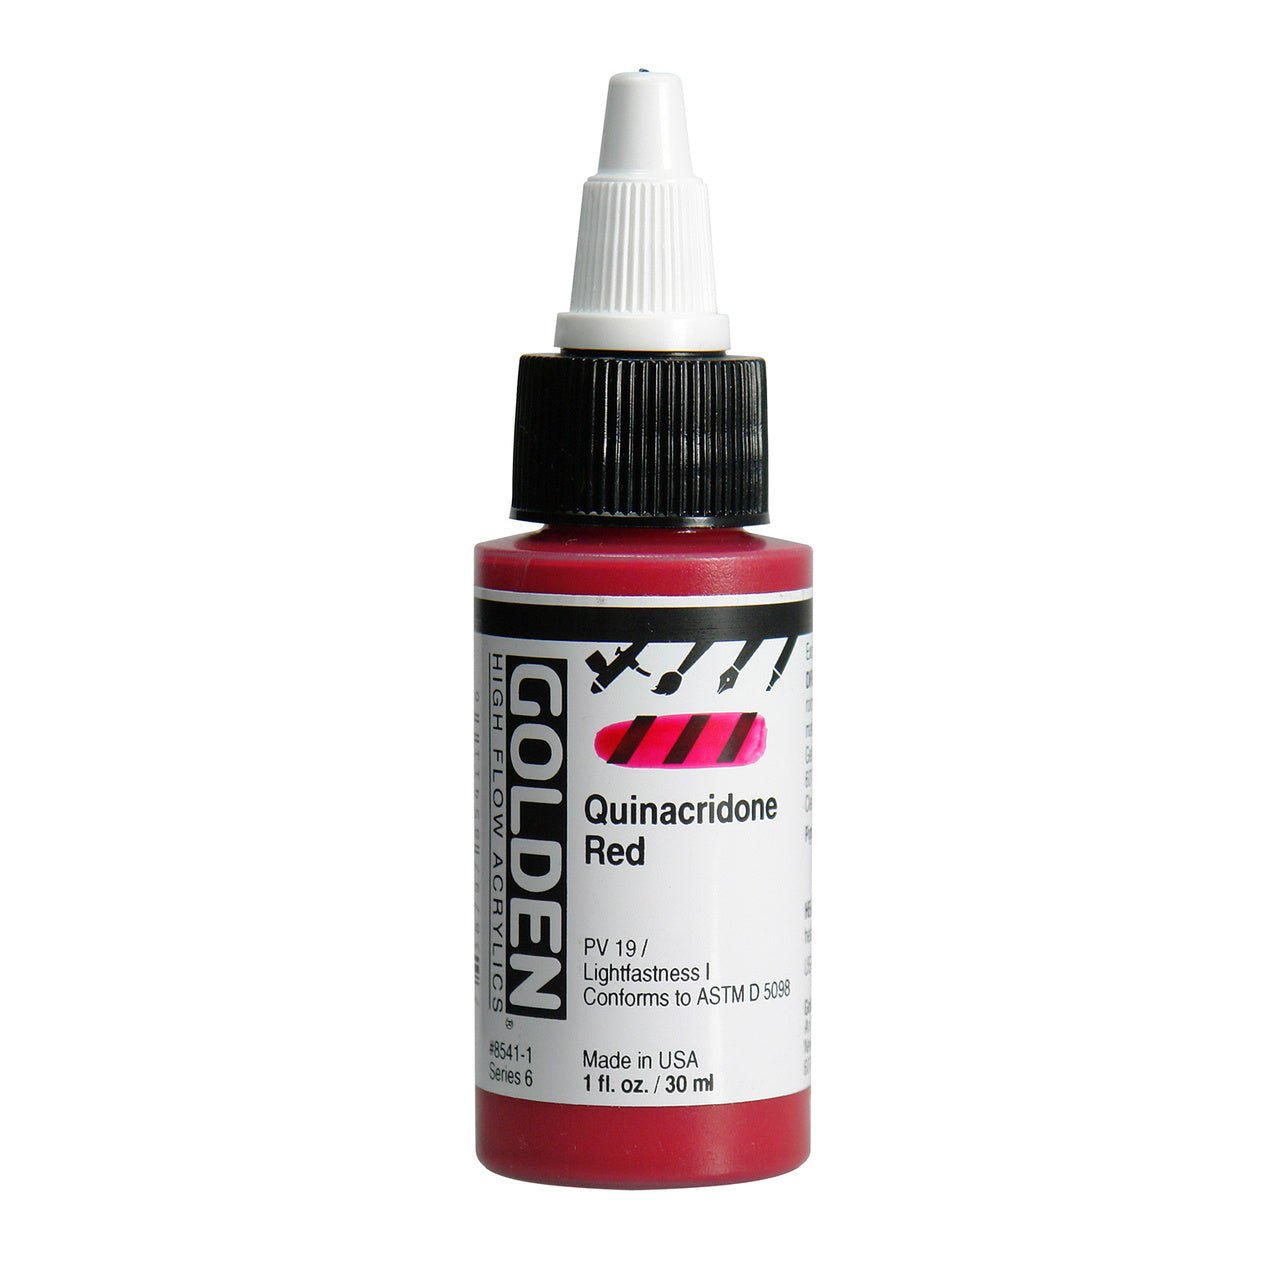 Golden High Flow Acrylic Quinacridone Red 1 oz - merriartist.com